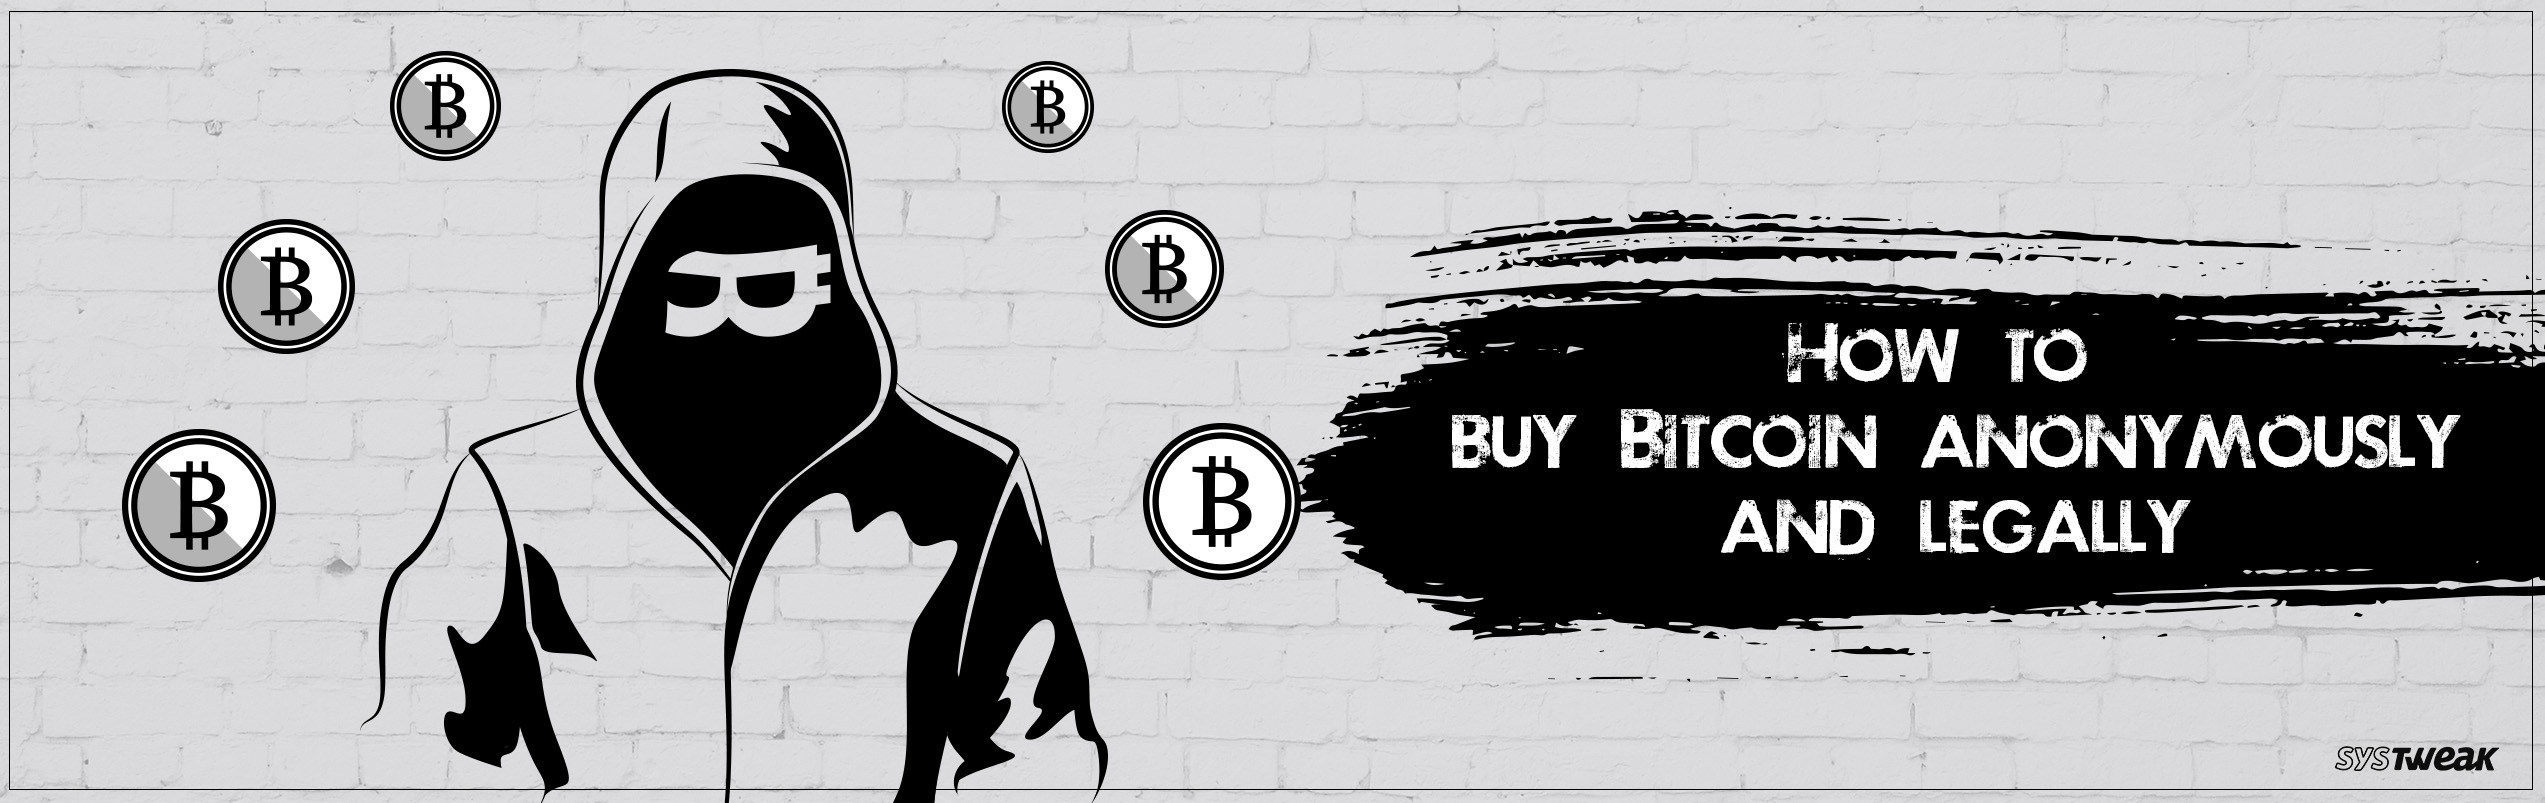 How To Buy Bitcoin Anonymously And Legally - 